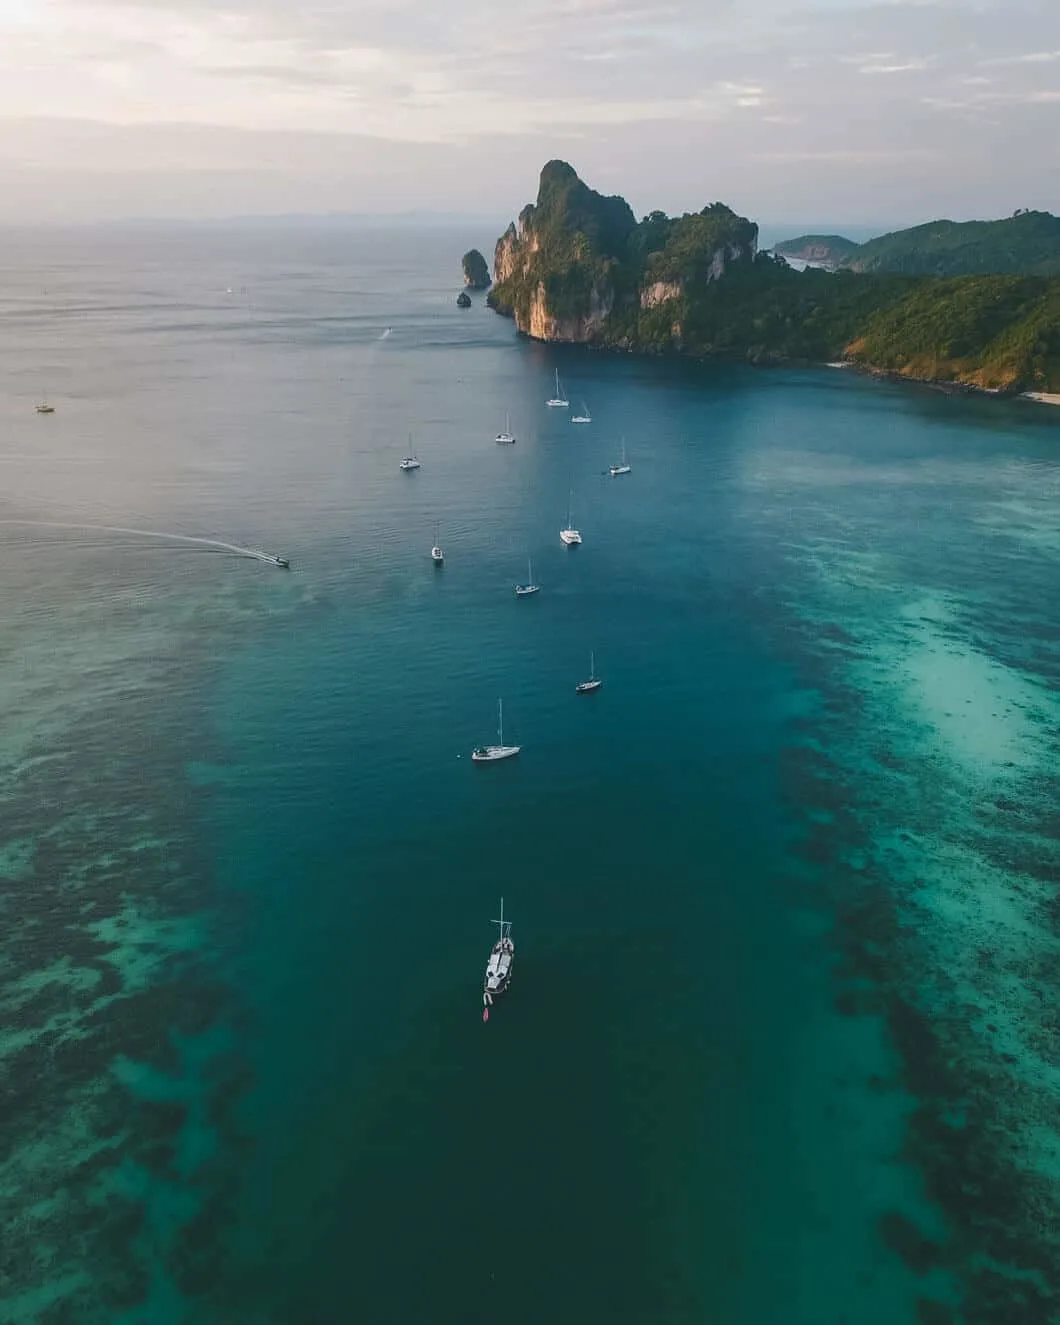 Many boats anchored out in the amazing ocean waters of Krabi, surrounded by coral reefs.